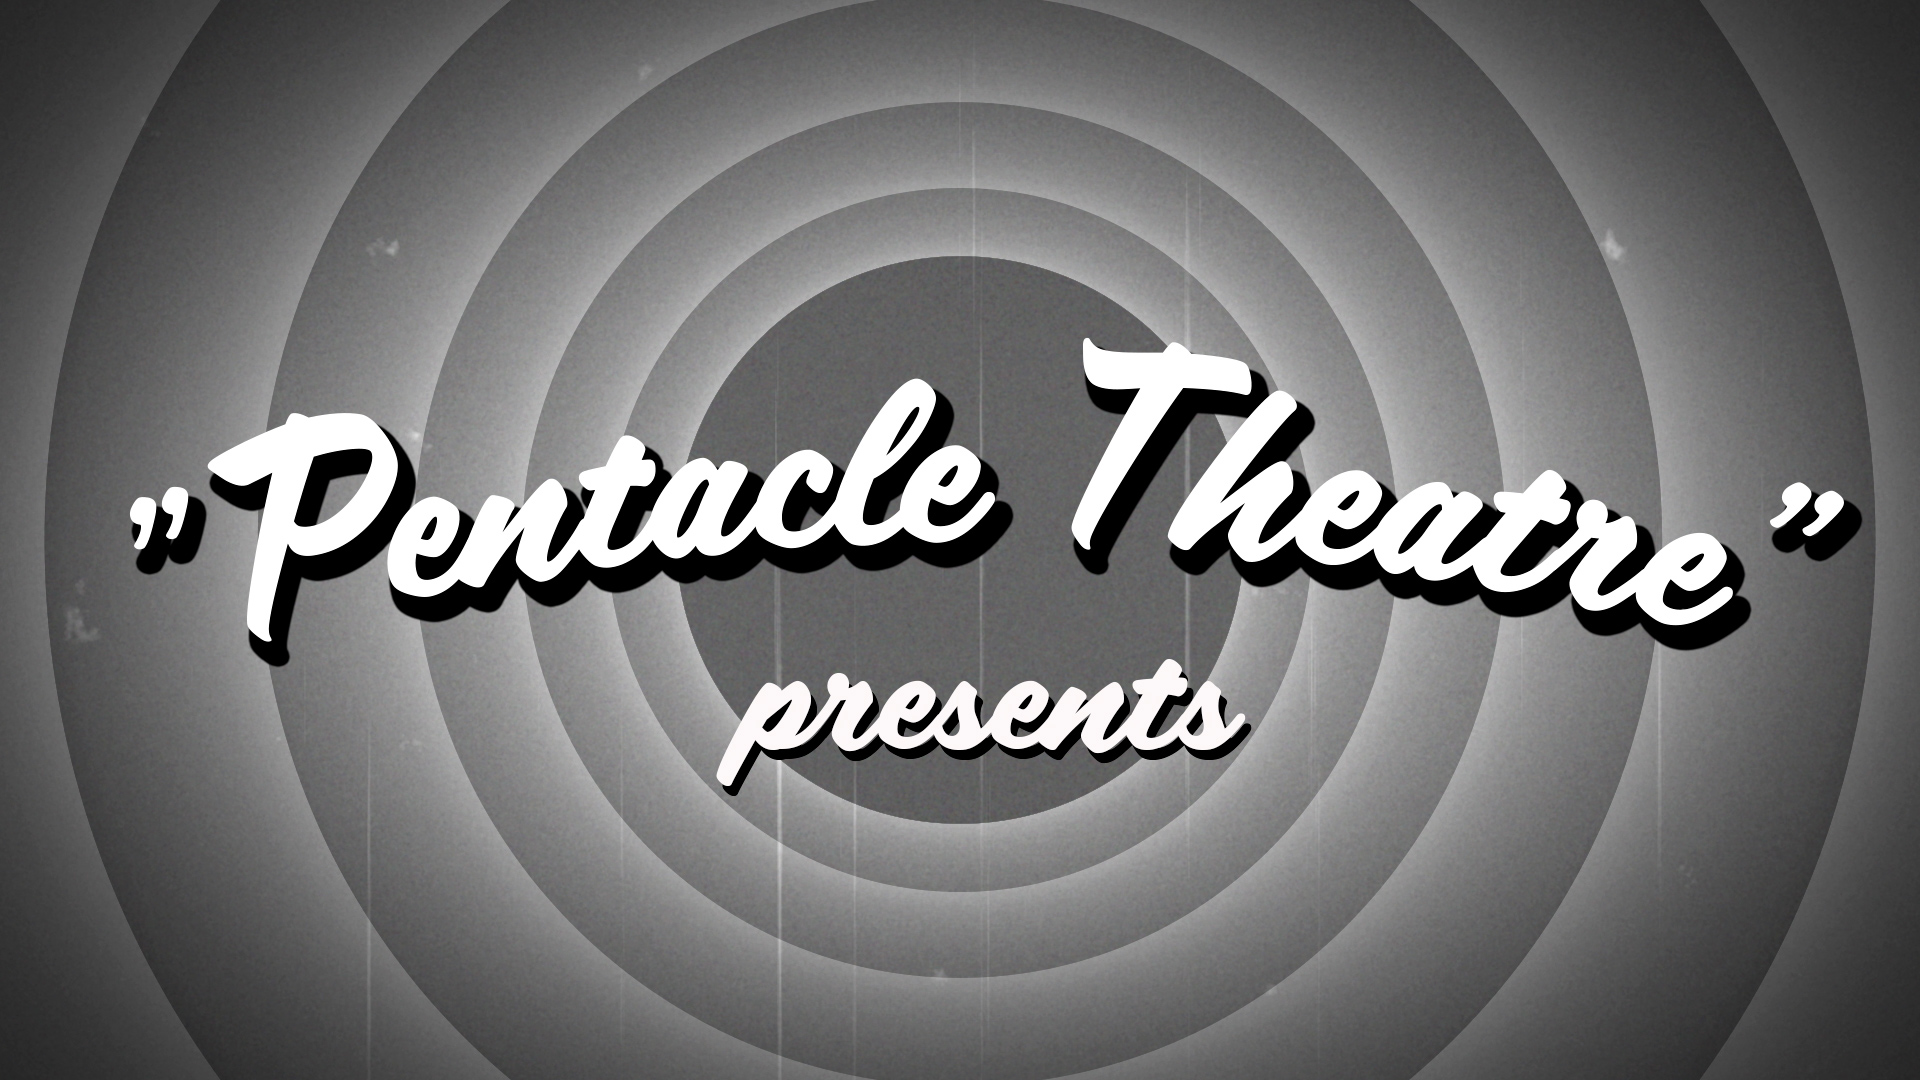 Pentacle Theatre launches “Behind the Mask” video series